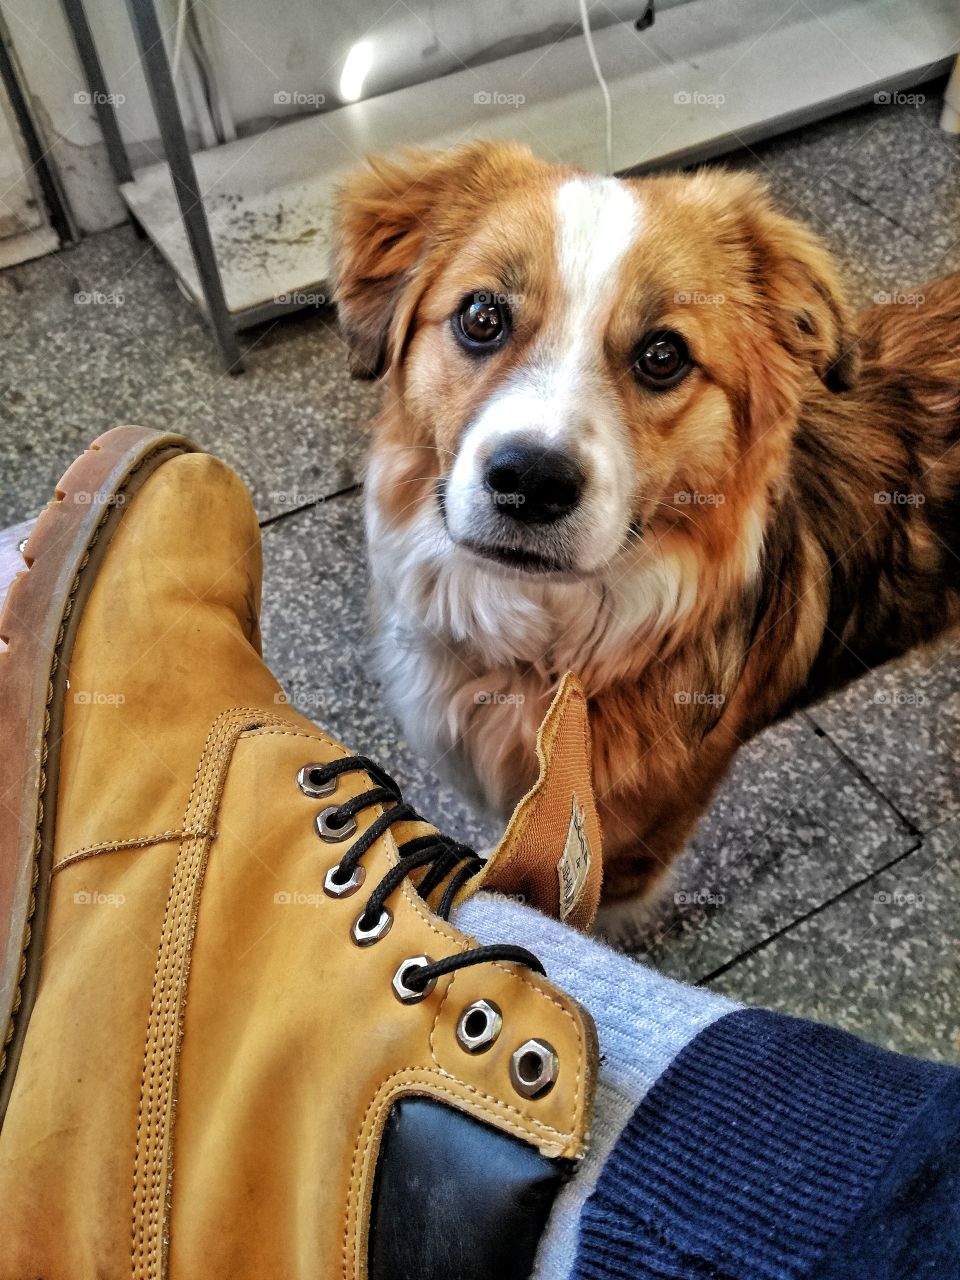 Dog and Timberland boots